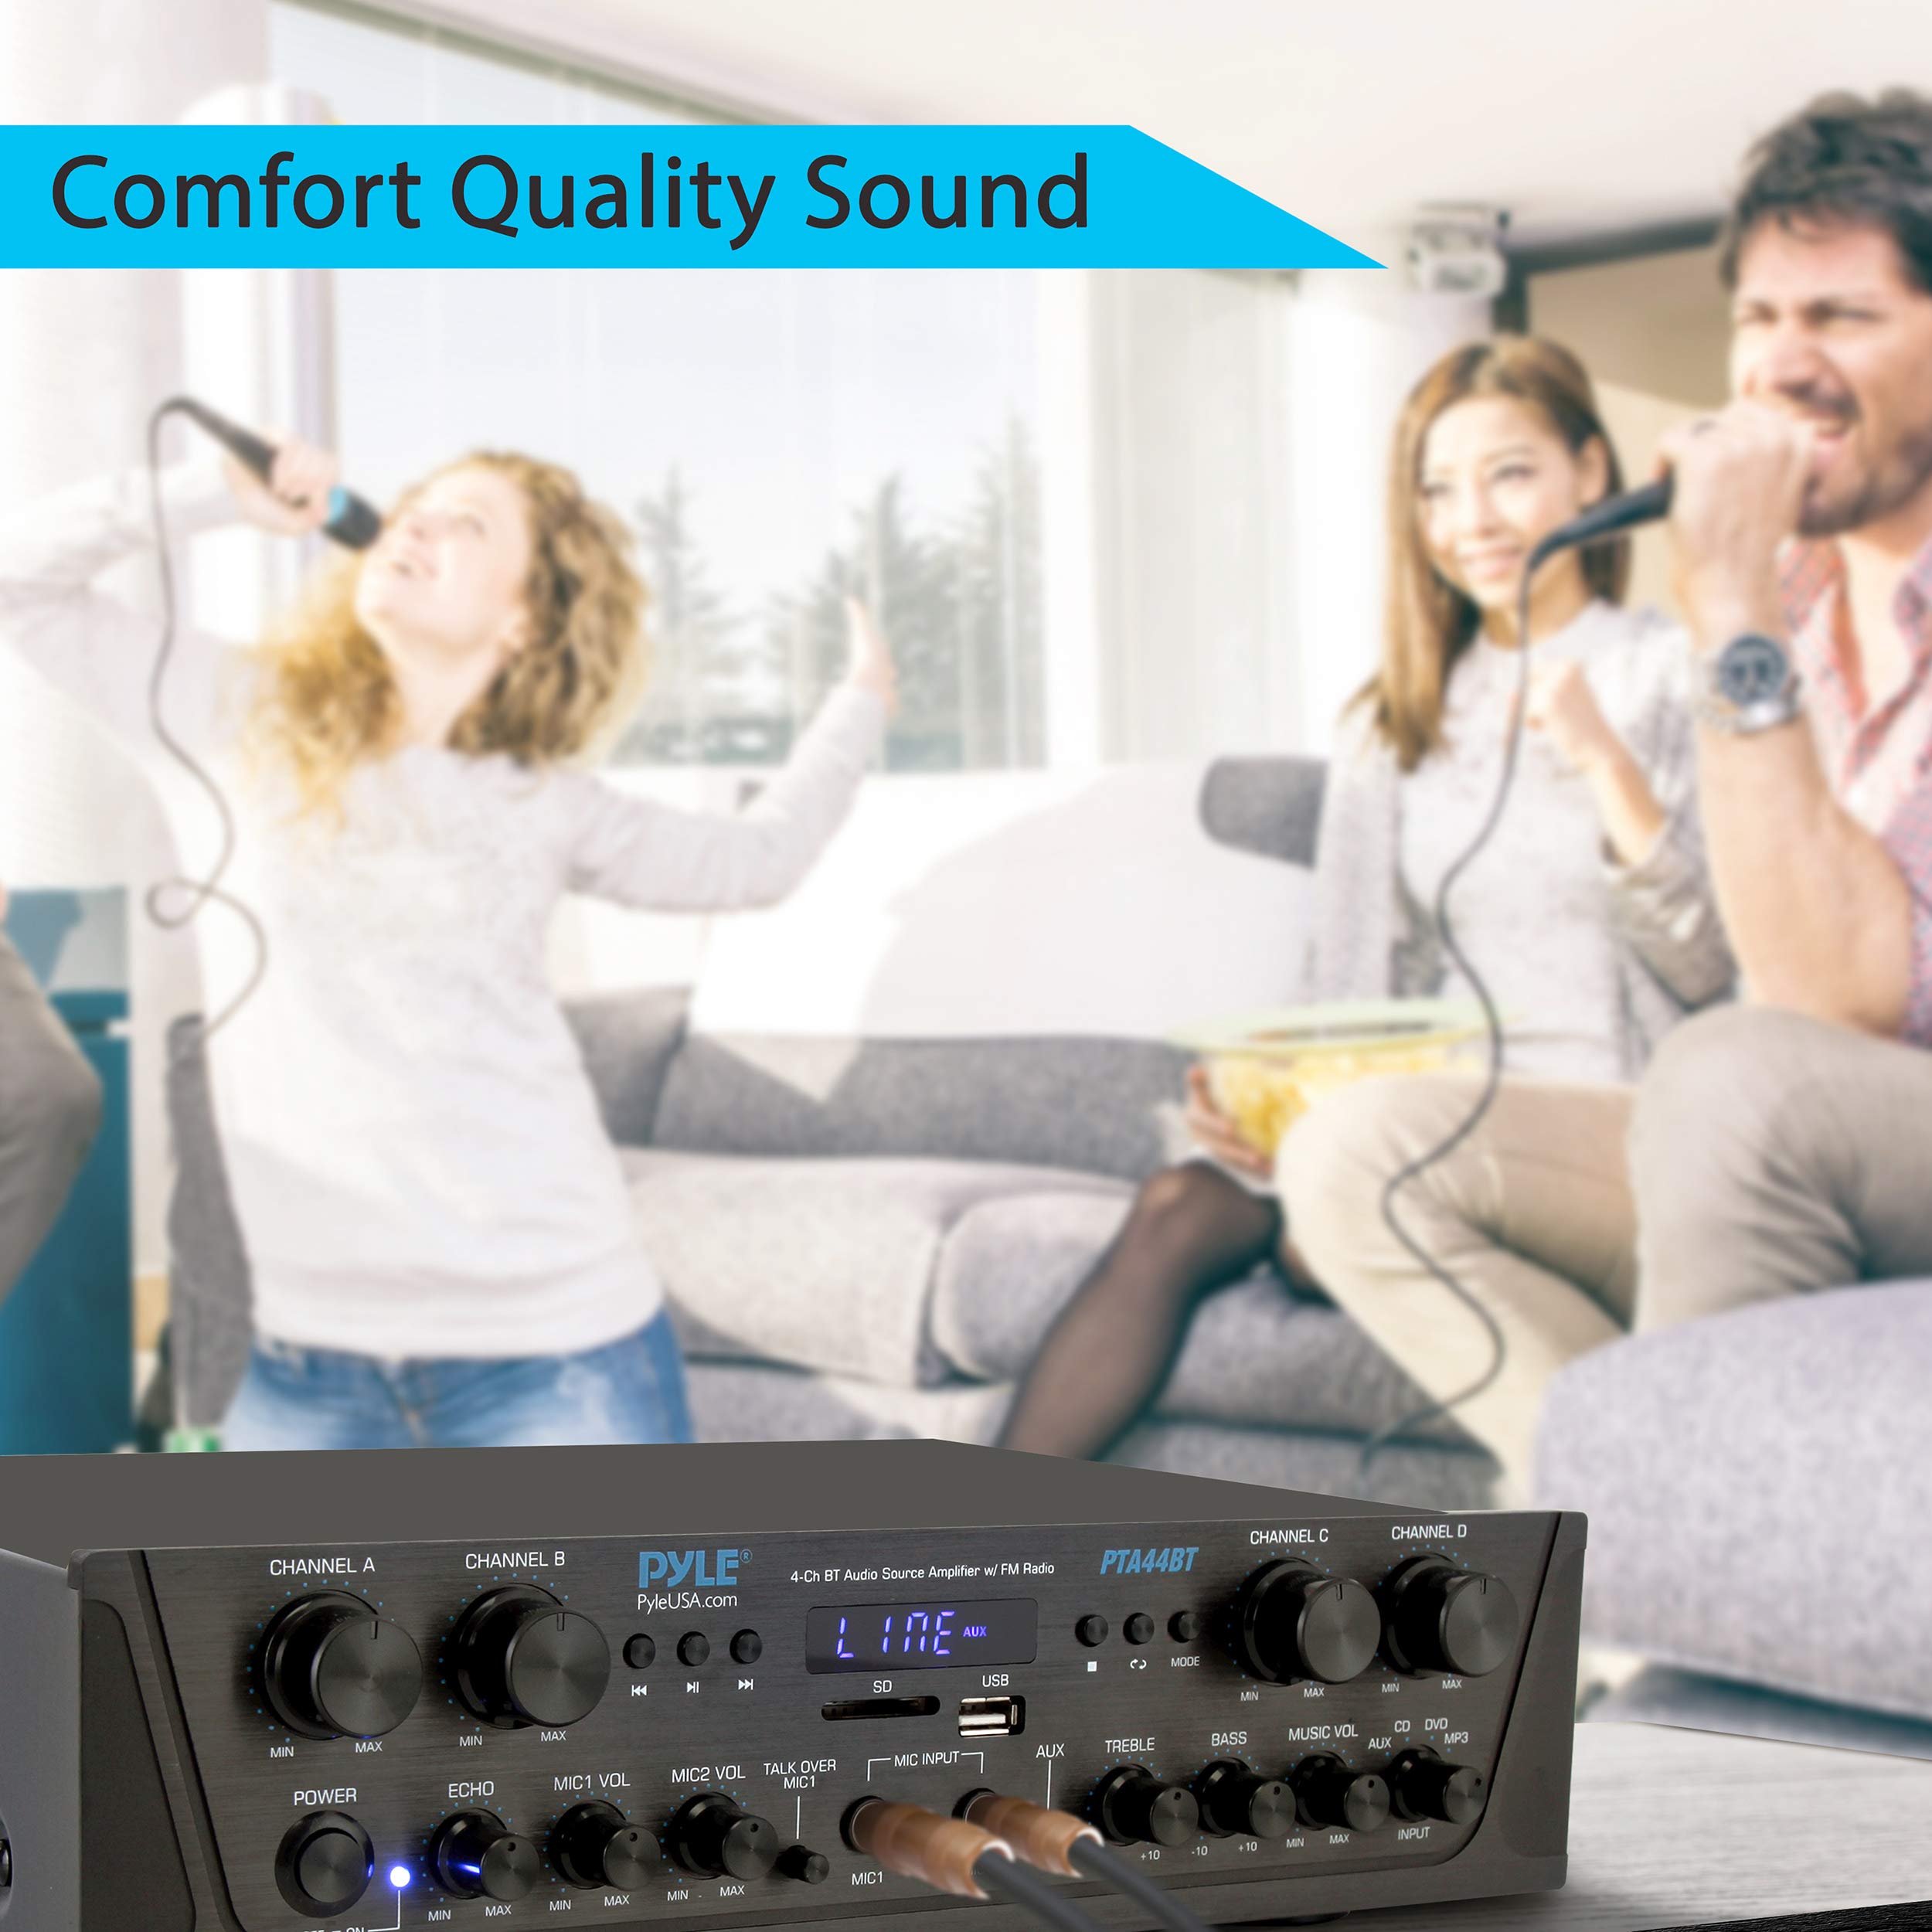 Pyle 500W Karaoke Wireless Bluetooth Amplifier - 4 Channel Stereo Audio Home Theater Speaker Sound Power Receiver w/AUX in, FM, RCA Subwoofer Speakers Out, USB, Microphone in w/Echo - Pyle PTA44BT.5